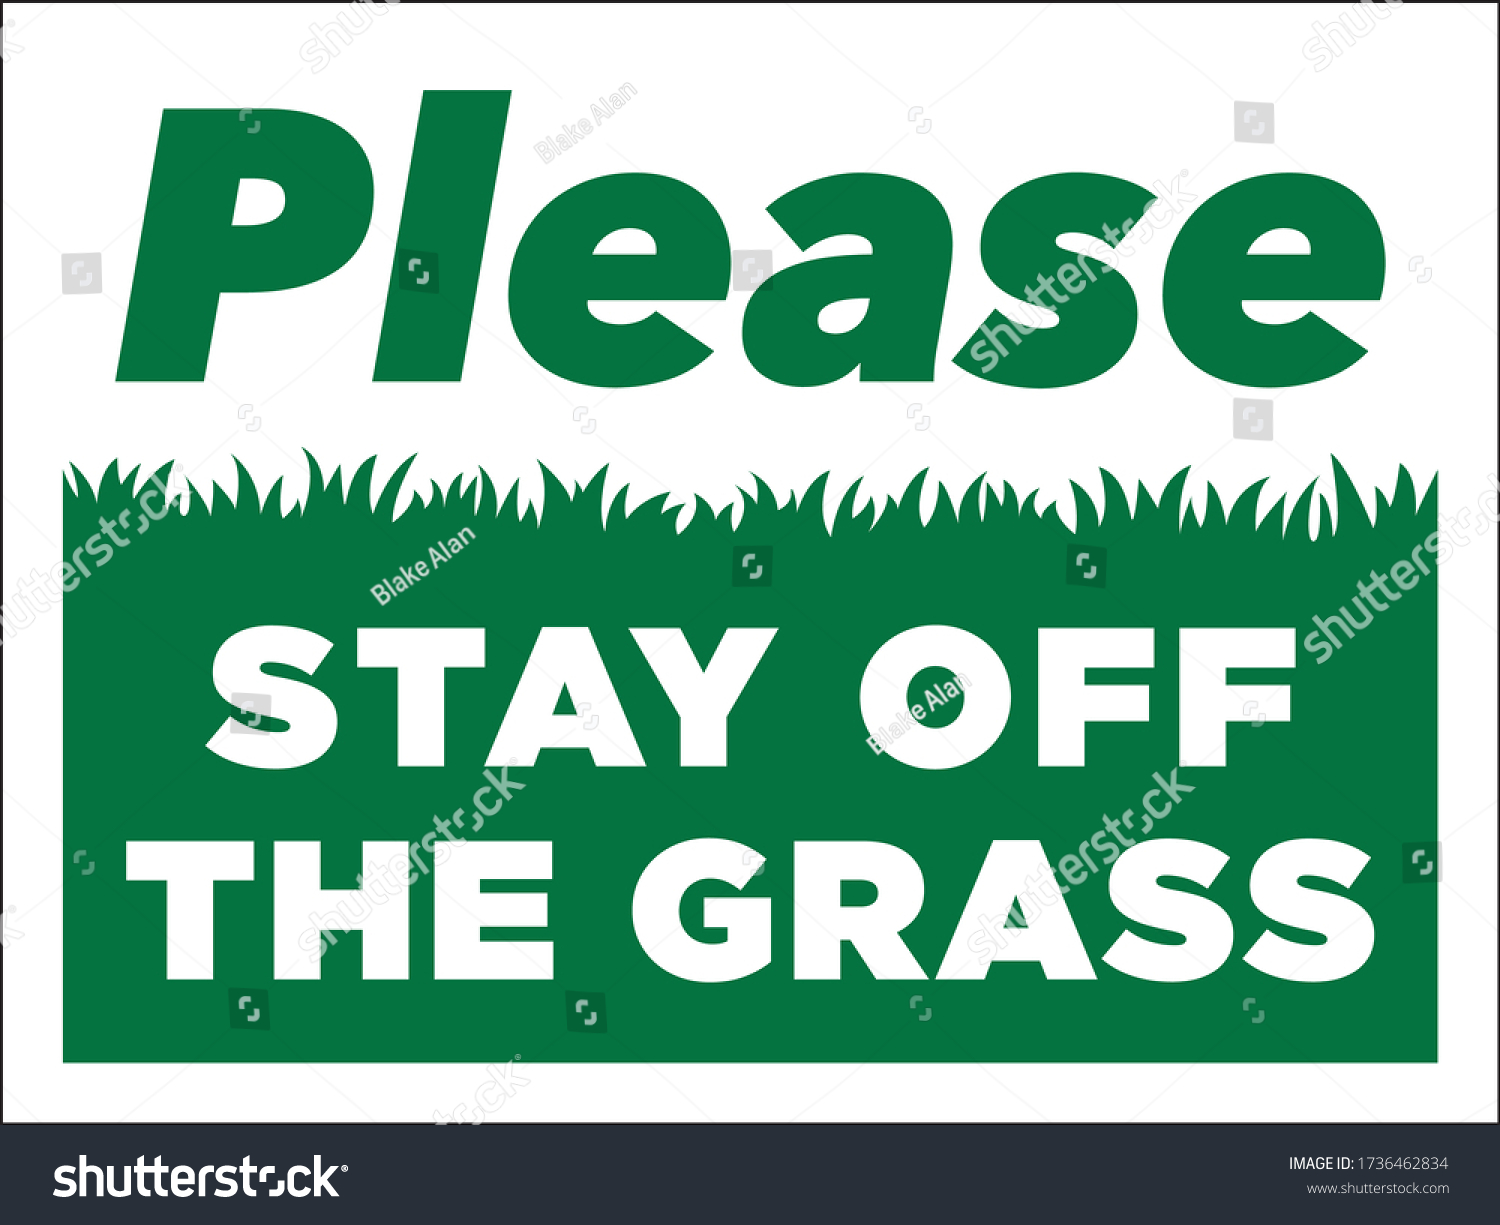 Stay off. Take off the grass другие указатели. Keep off the grass. To sign off. Плиз стей